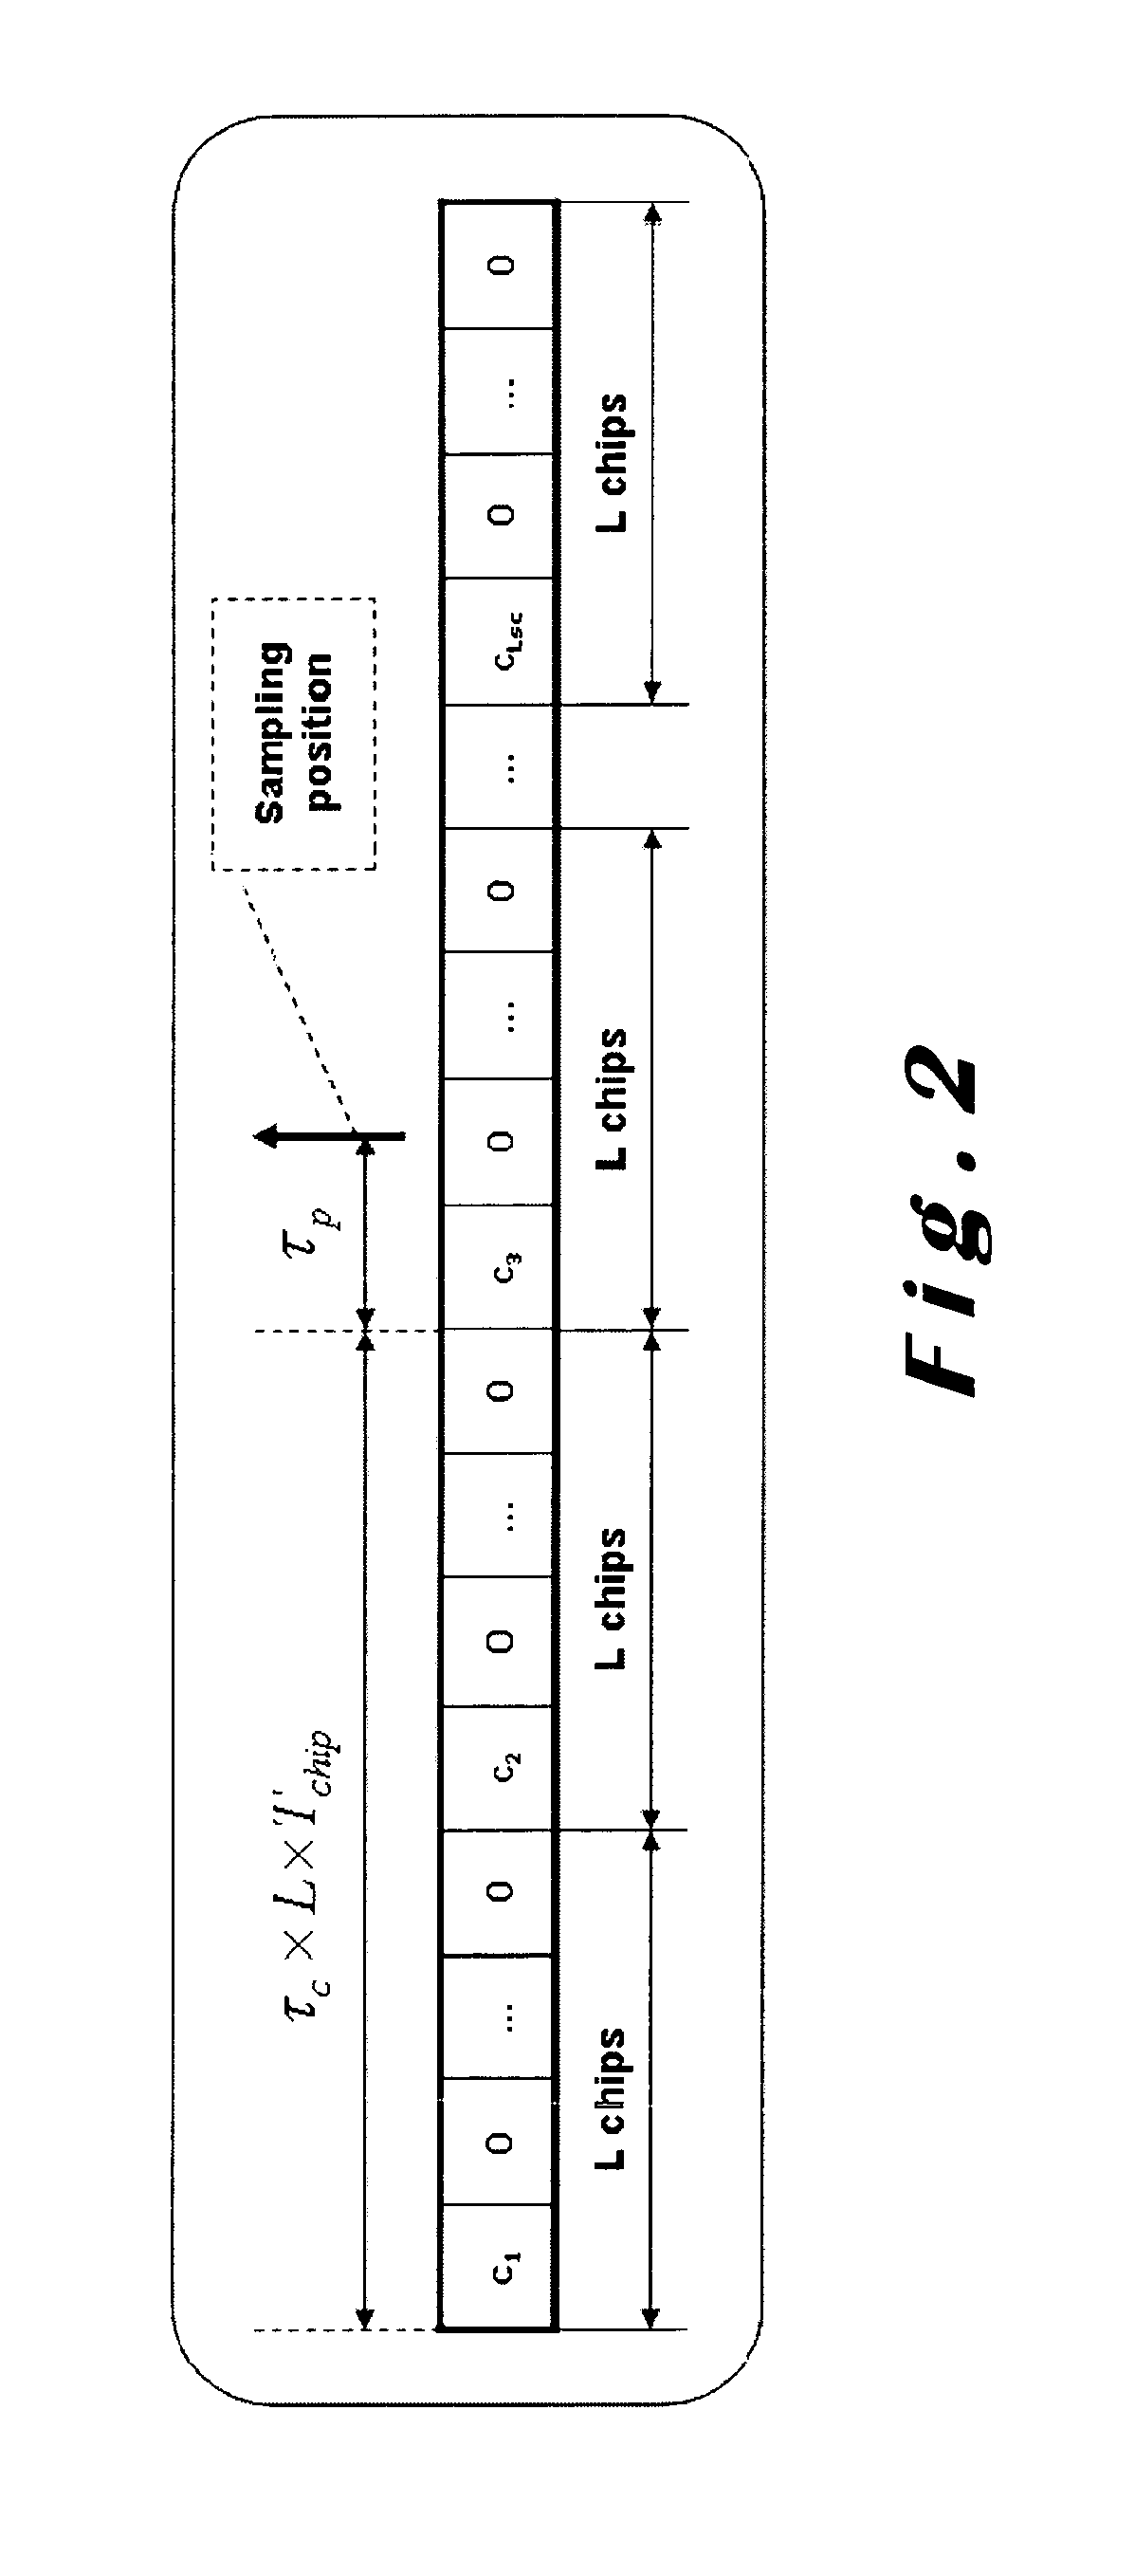 Methods for Fast and Low-Power UWB IR Baseband Receiver Synchronization